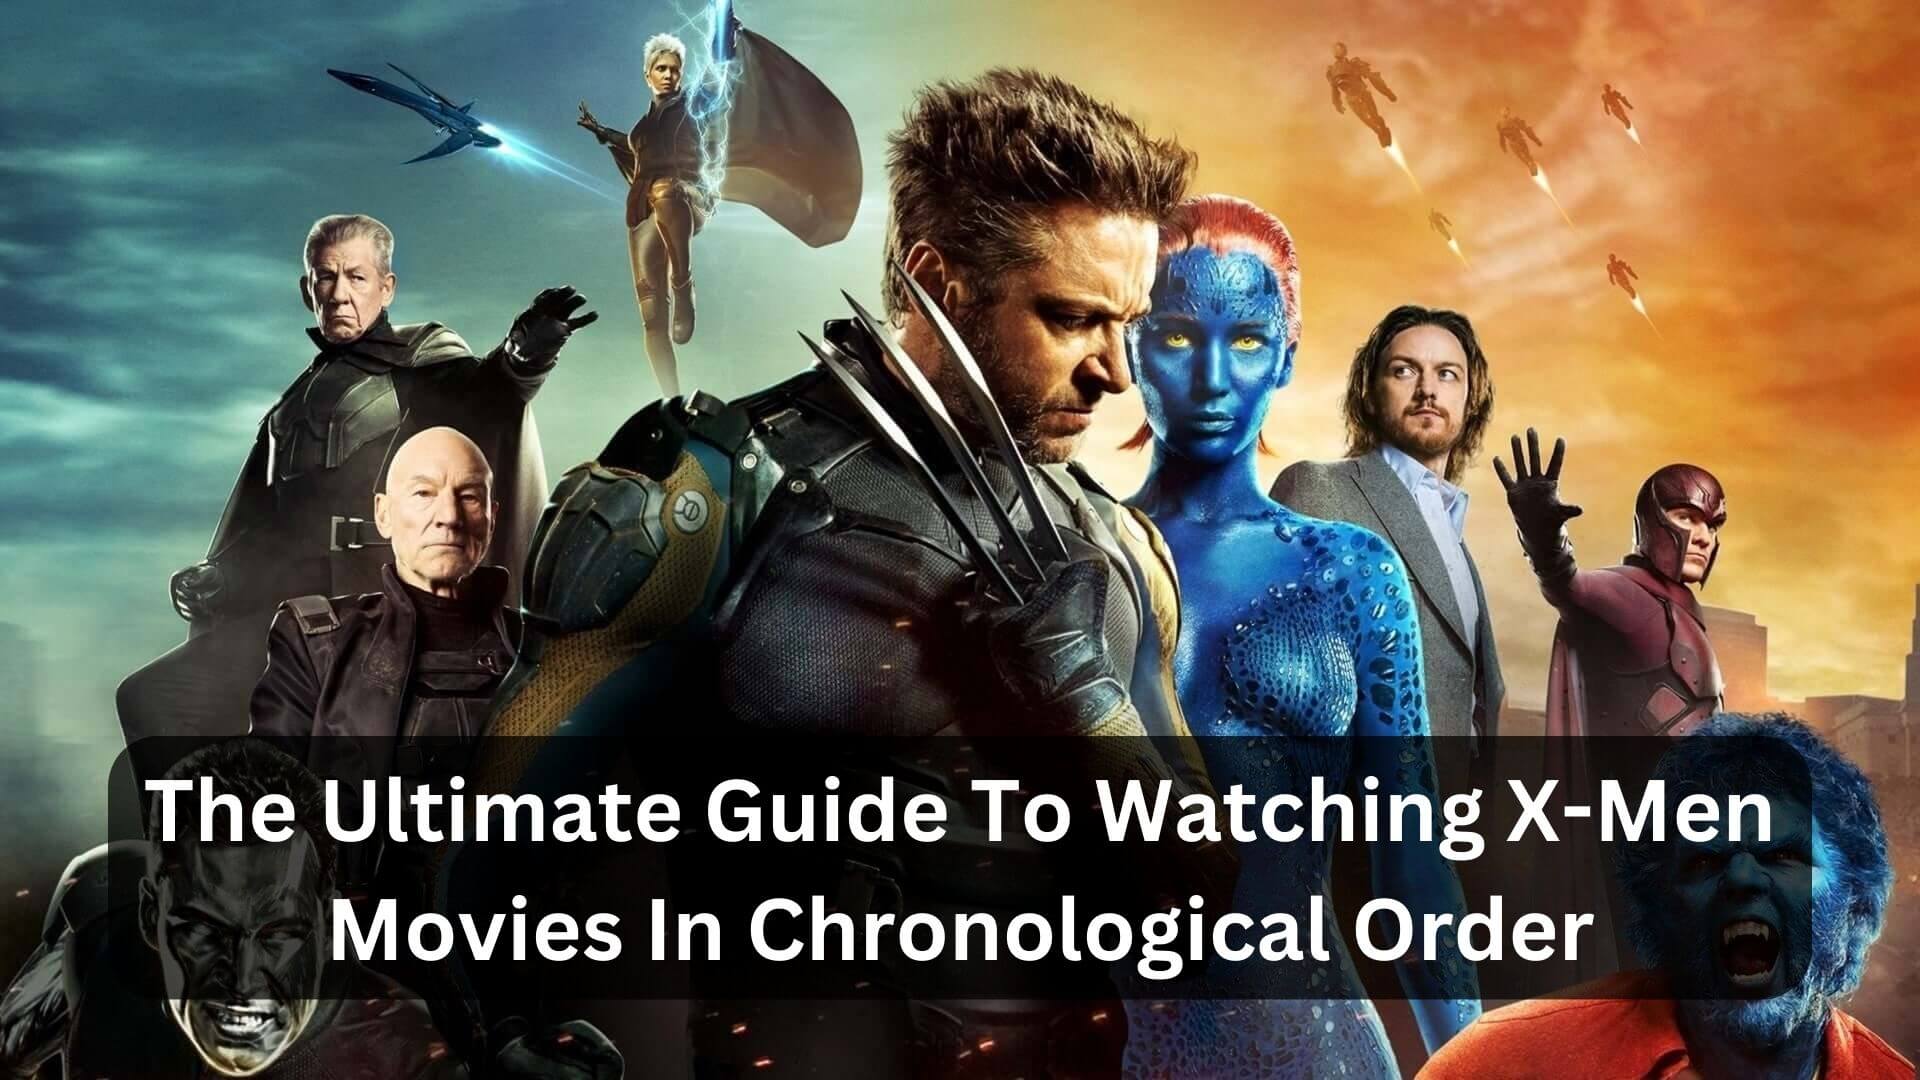 The Ultimate Guide To Watching X-Men Movies In Chronological Order (1)